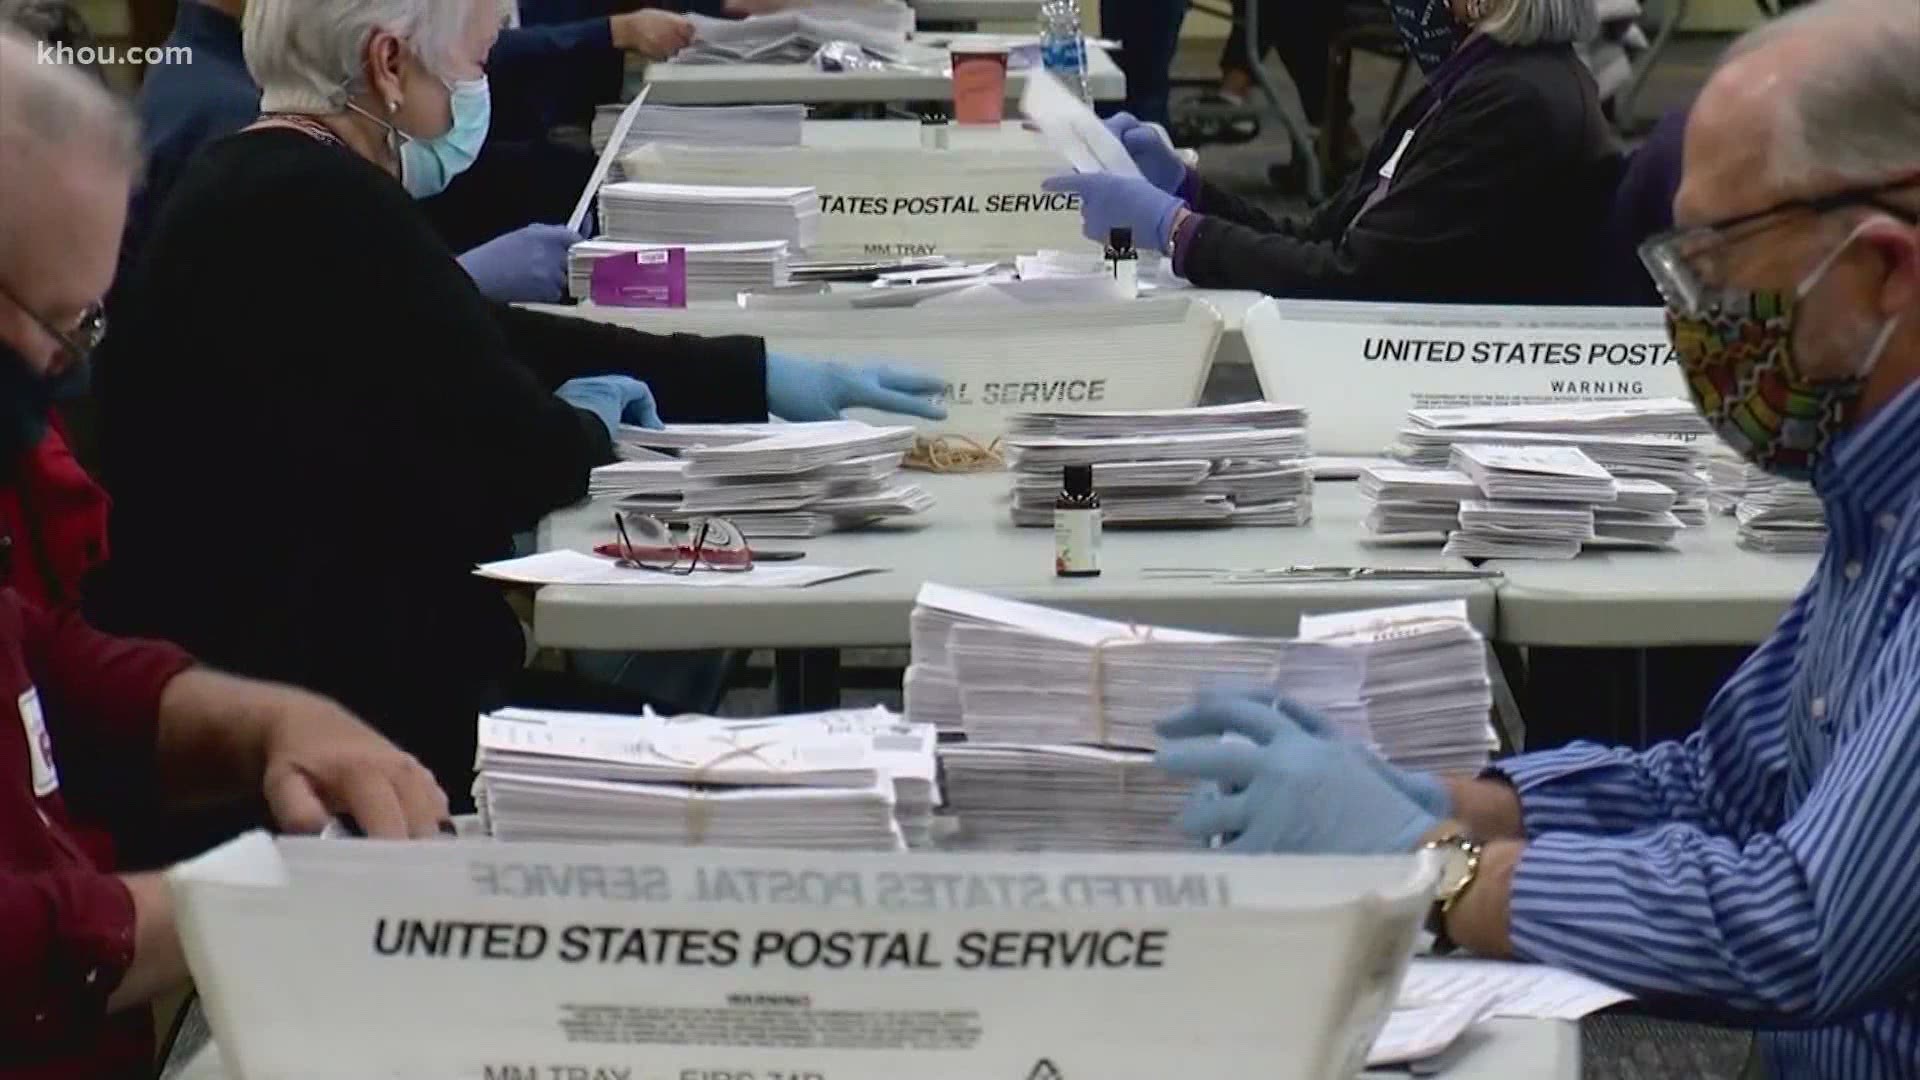 The count is still underway in several key states this morning. These are the latest updates from #HTownRush and CBS News.